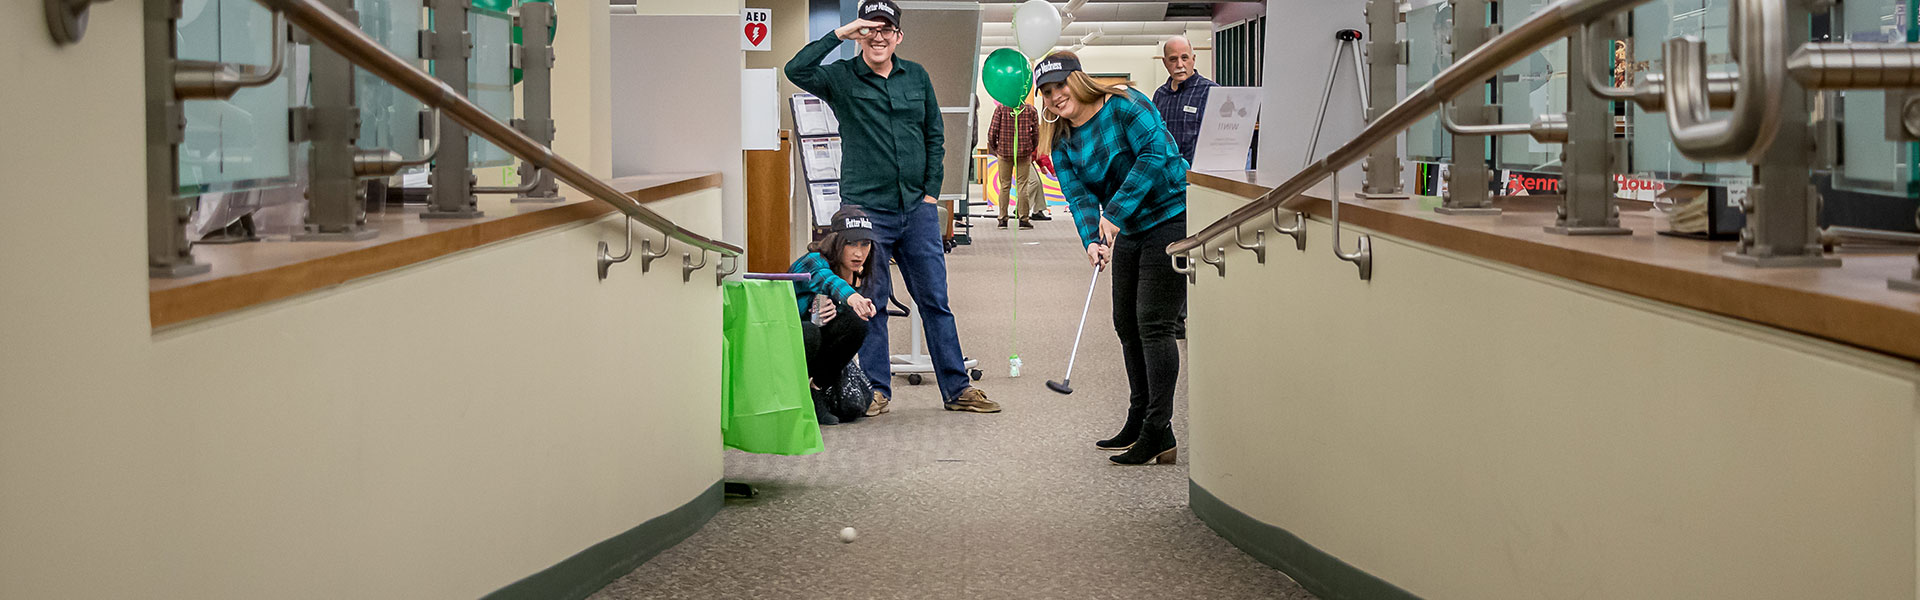 Group of People playing mini golf at Wheaton Public Library